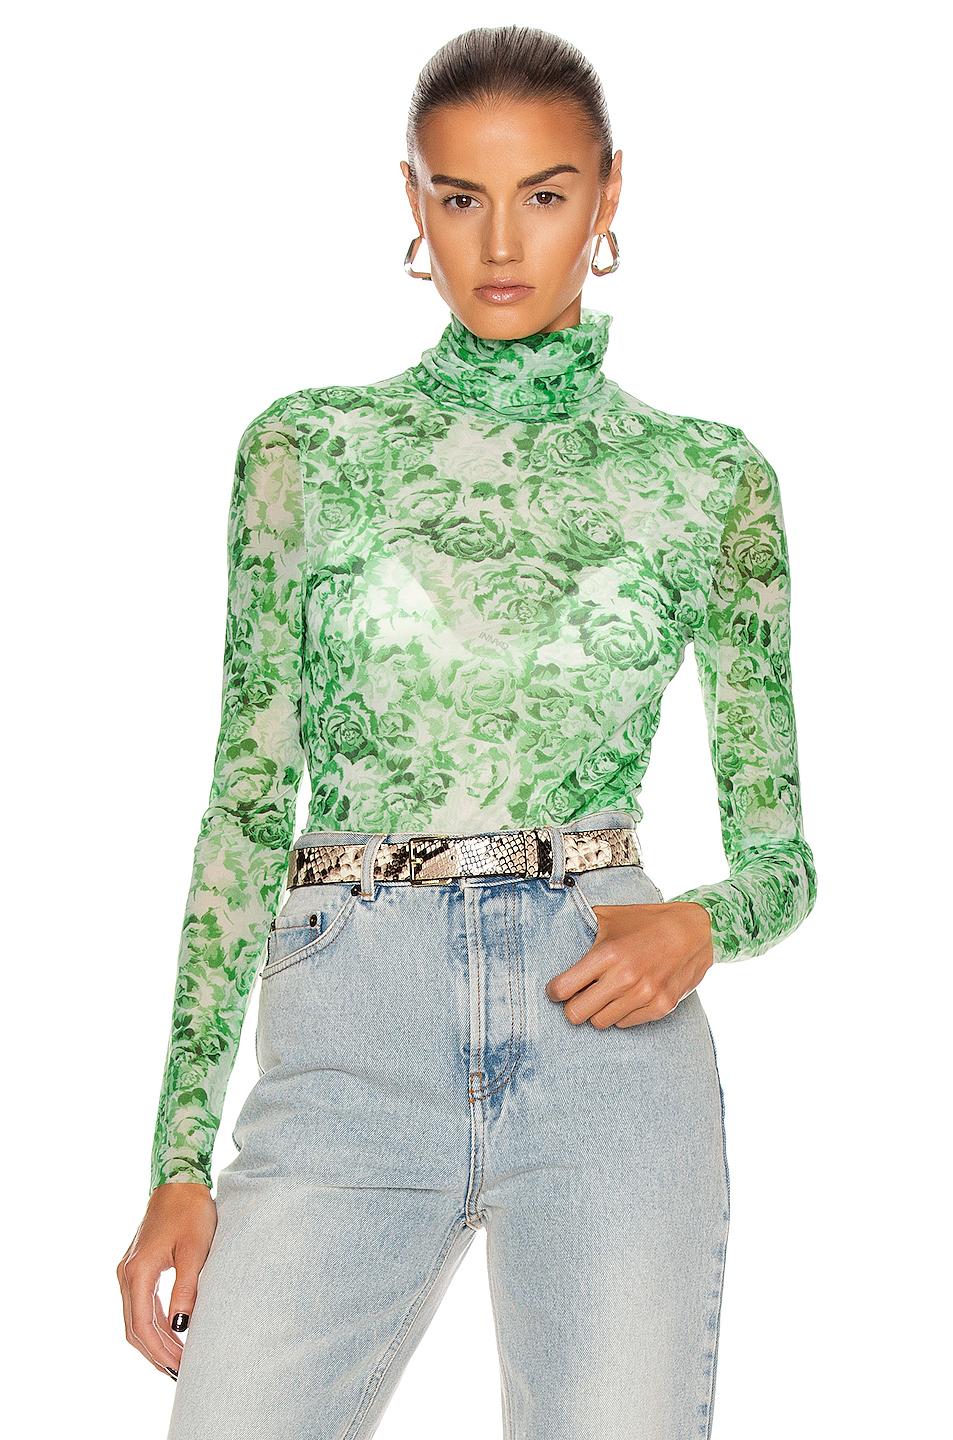 Ganni Synthetic Printed Mesh Top in Green - Lyst